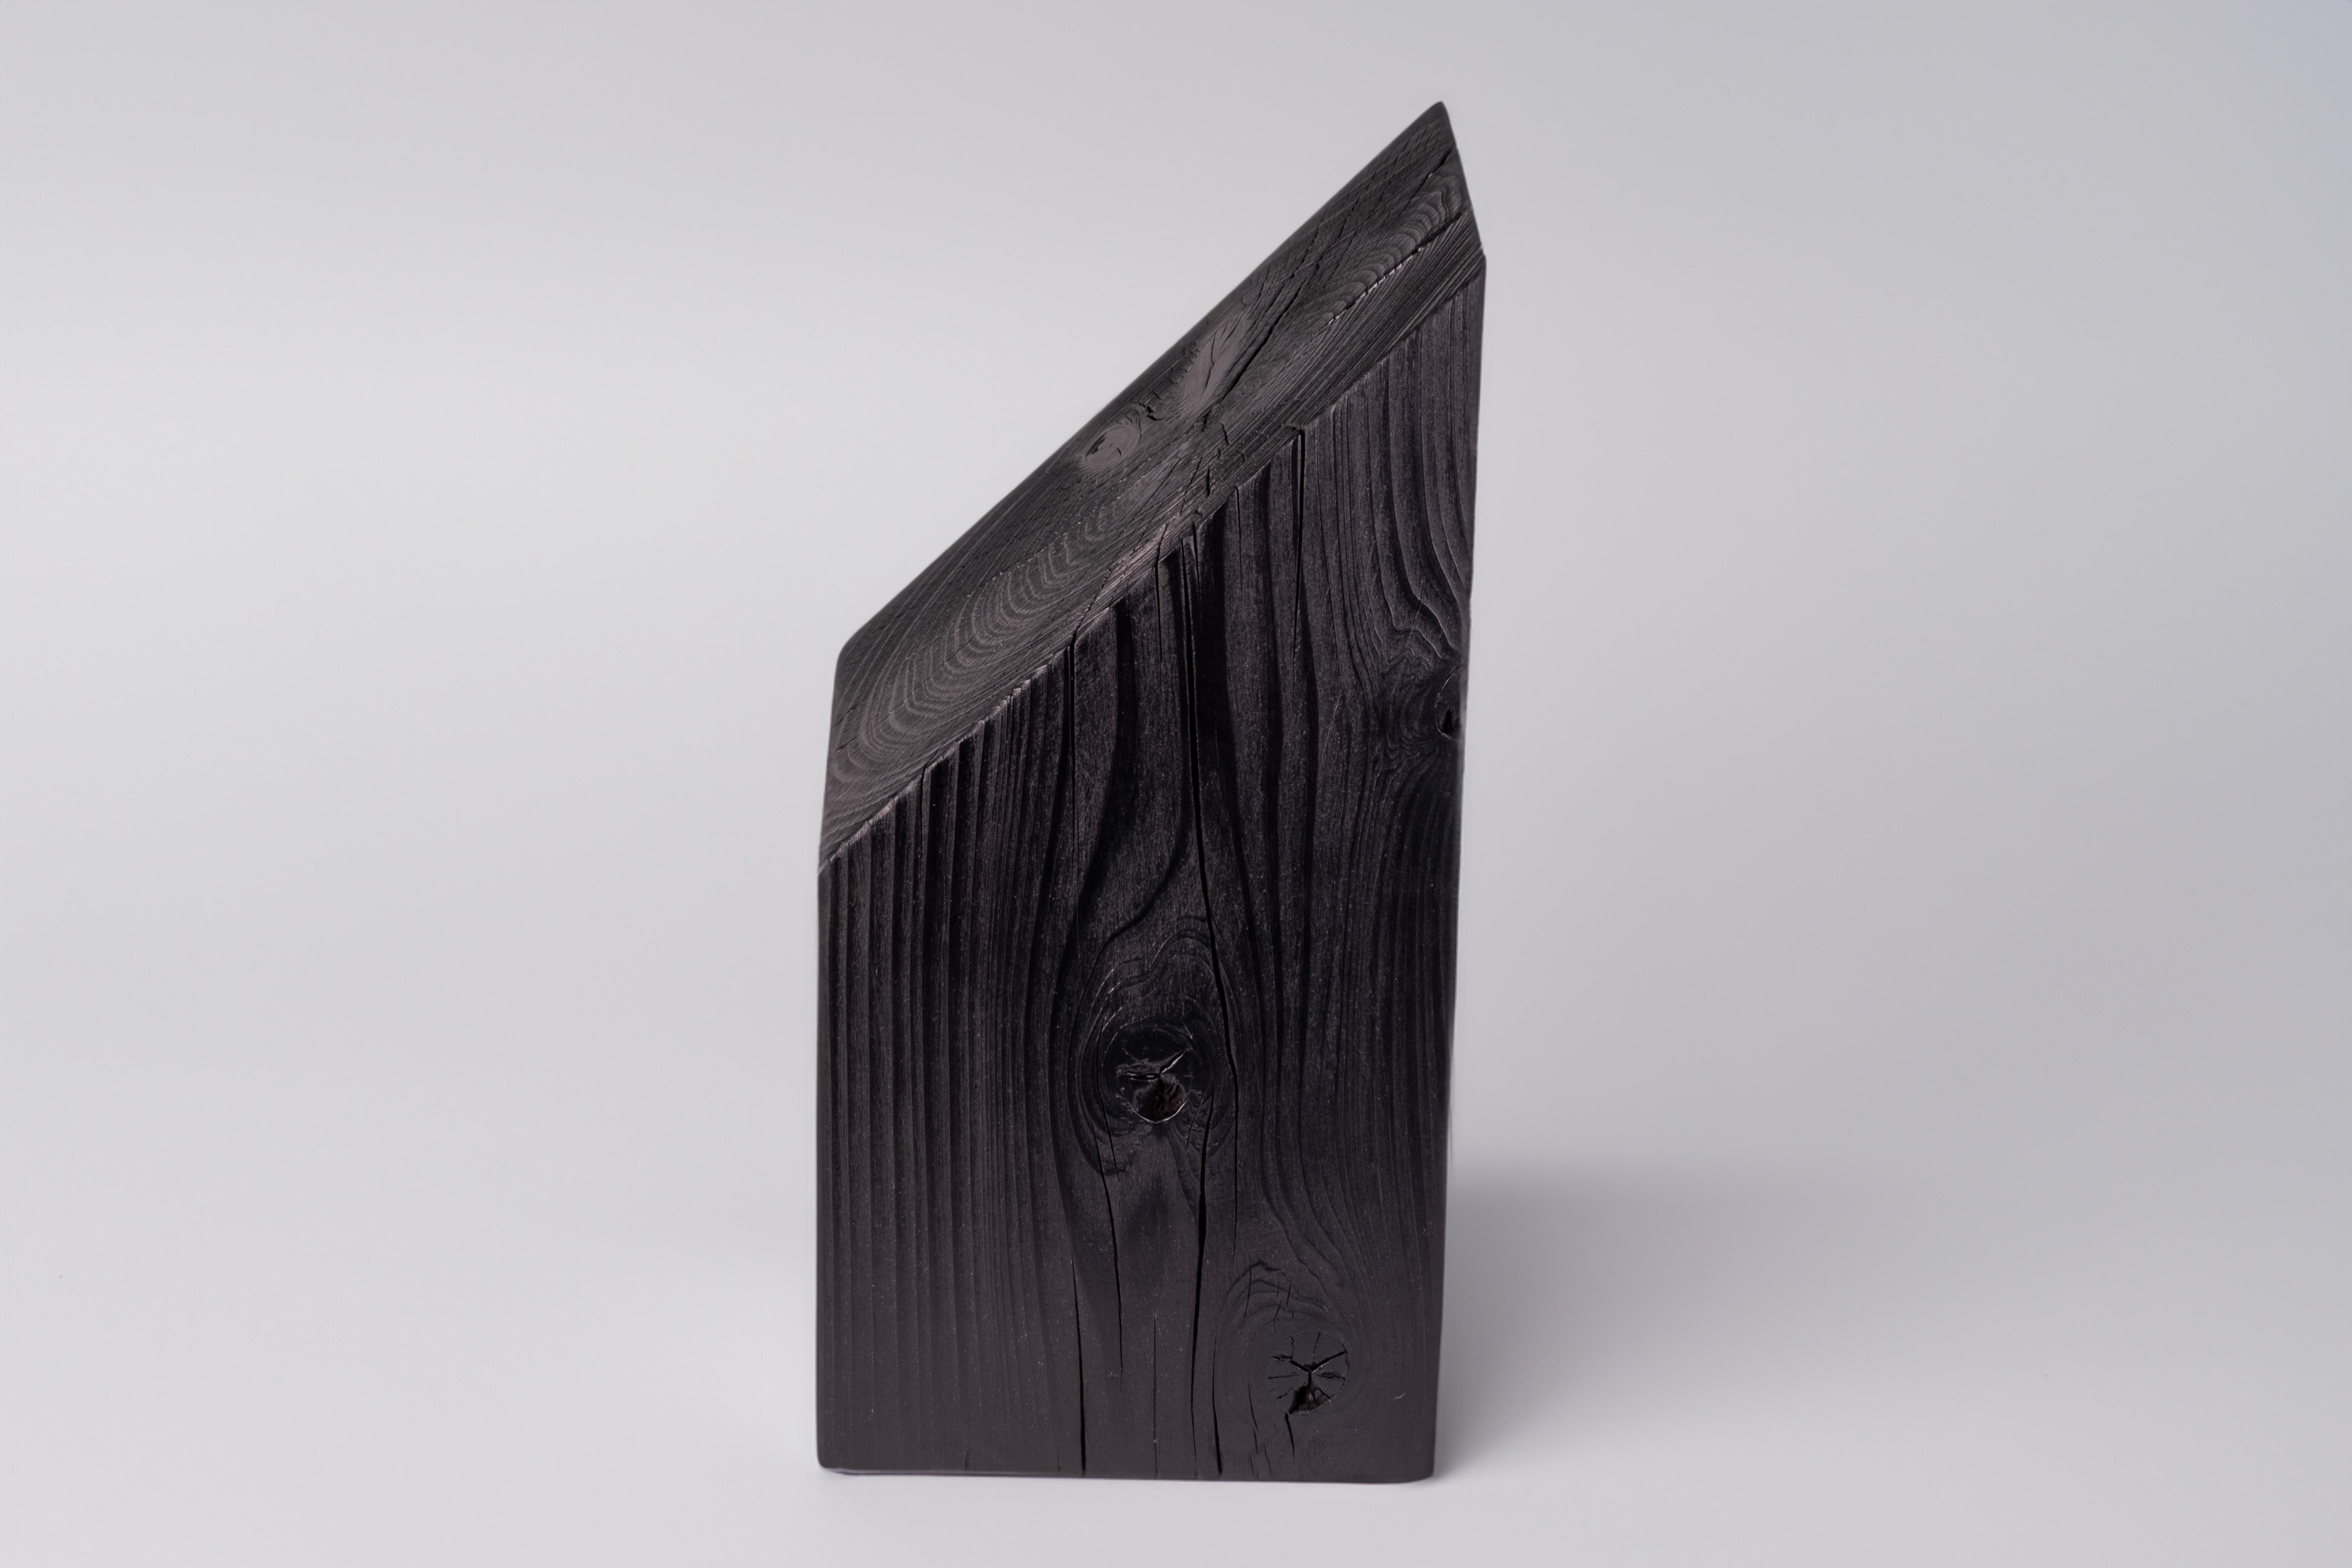 Introducing our Ebonized Cypress Wood Decoration, carefully crafted in our Westhampton Beach studio. This unique piece showcases the artistry of nature, with its angled cut revealing both the captivating end grain and the elegant long grain